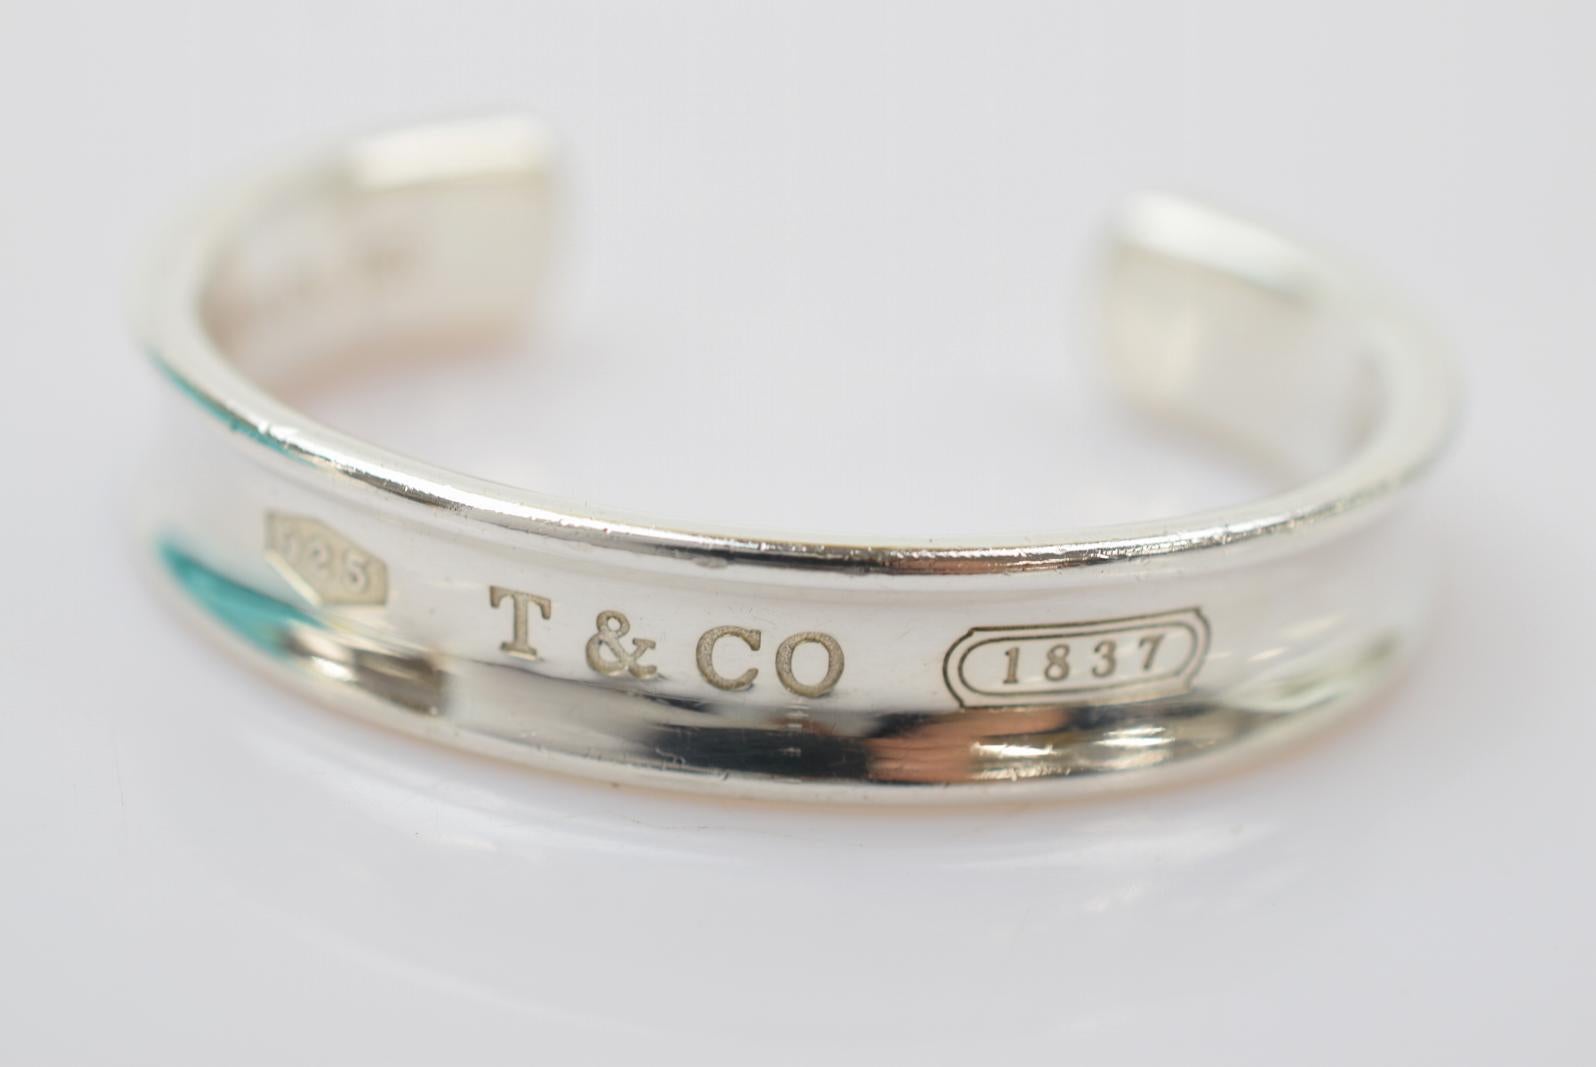 Tiffany & Co Sterling Silver Logo Cuff Bangle Bracelet in Box

Sterling silver - 925
Slip on
Made in Italy
Inner circumference ~6